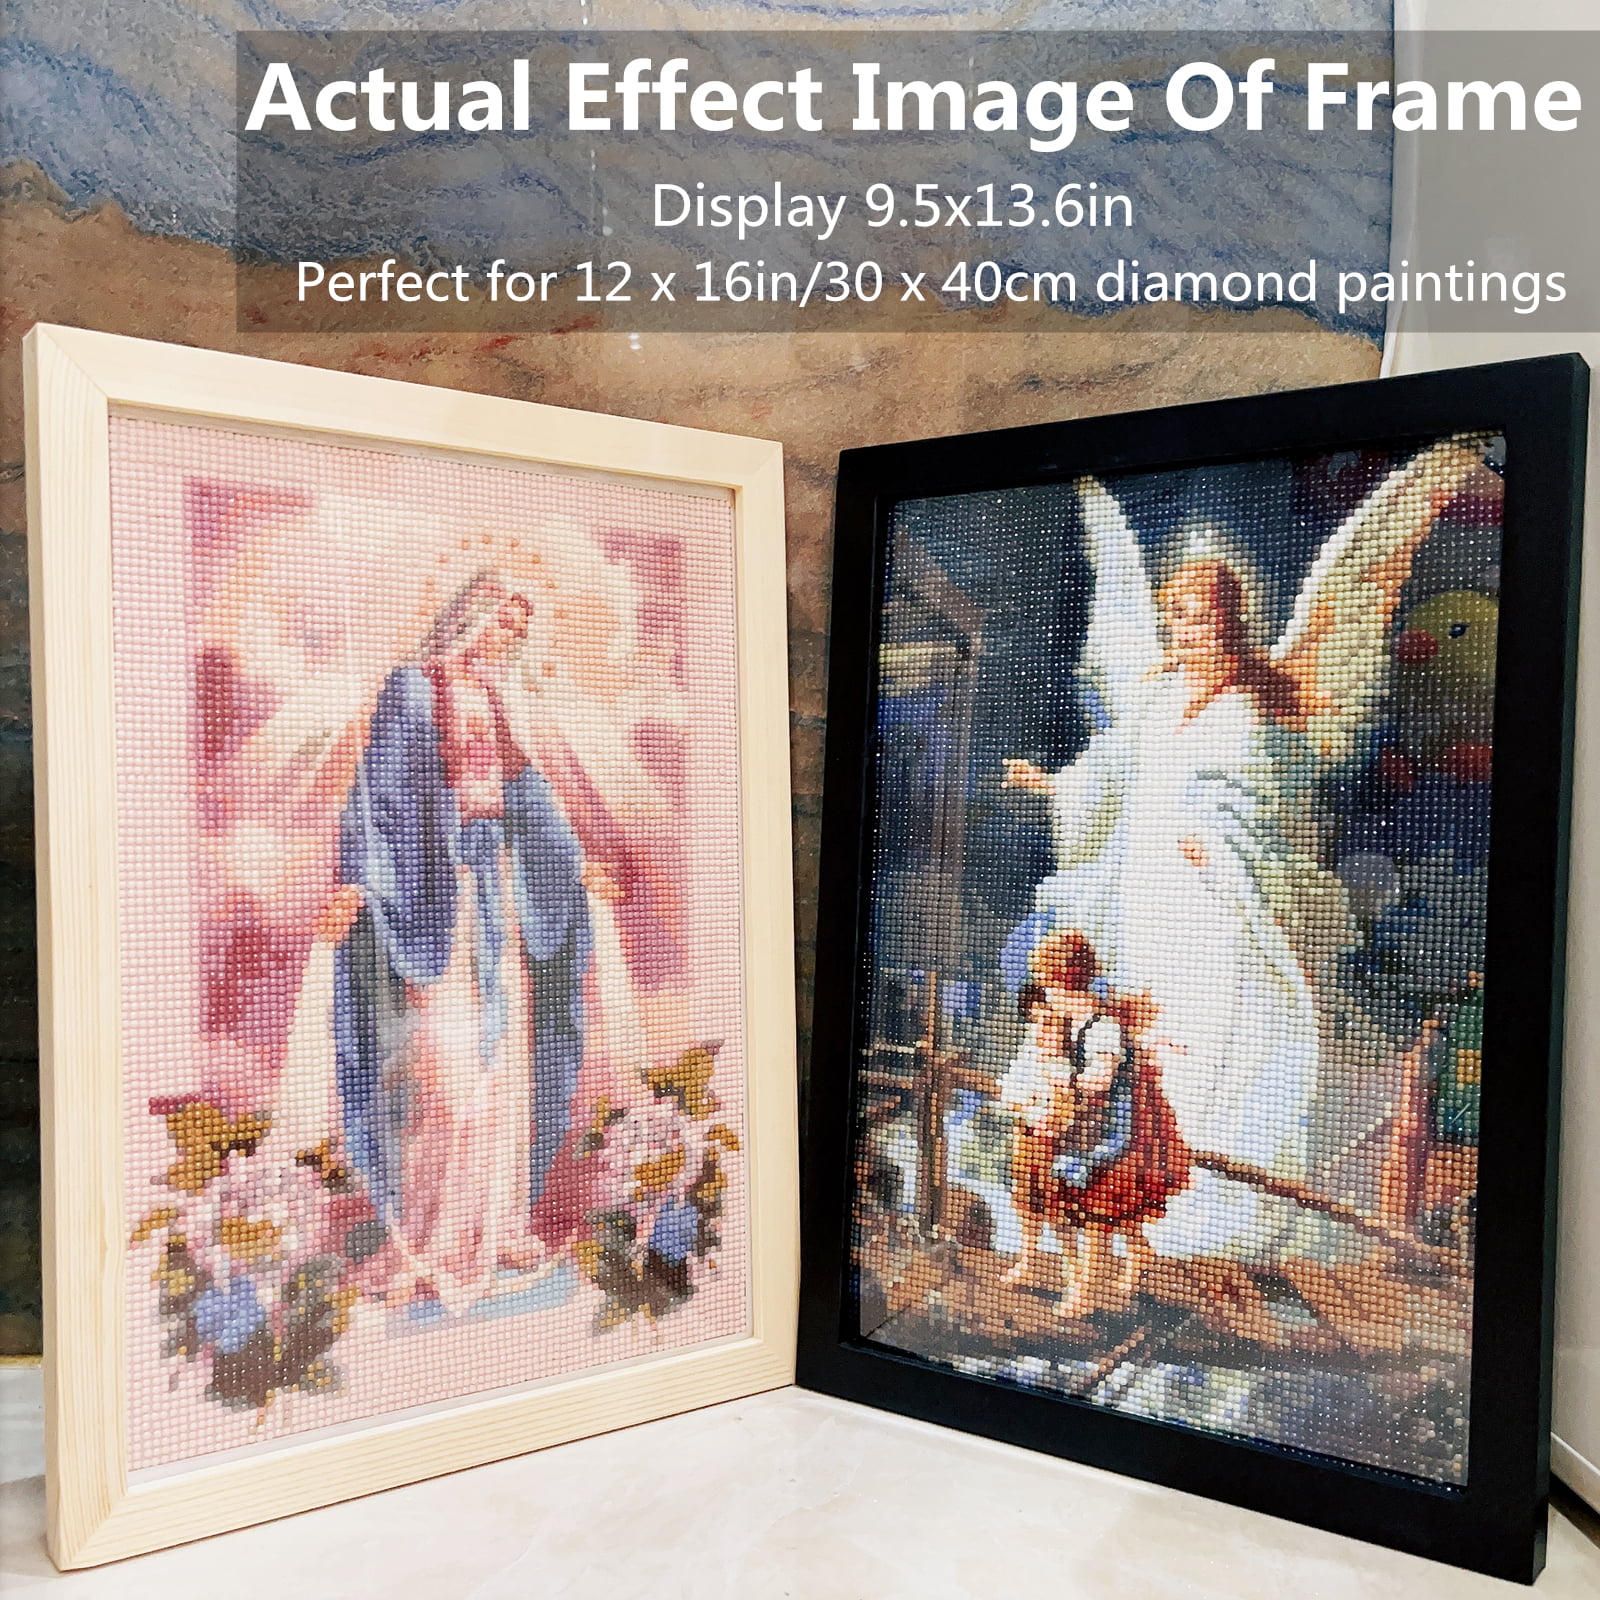 Mxtallup 12x16 Diamond Painting Frames Wood ,Display Pictures 10x14 Inch/25X35 cm with Mat or 12x16 inch /30X40 cm Without Ma